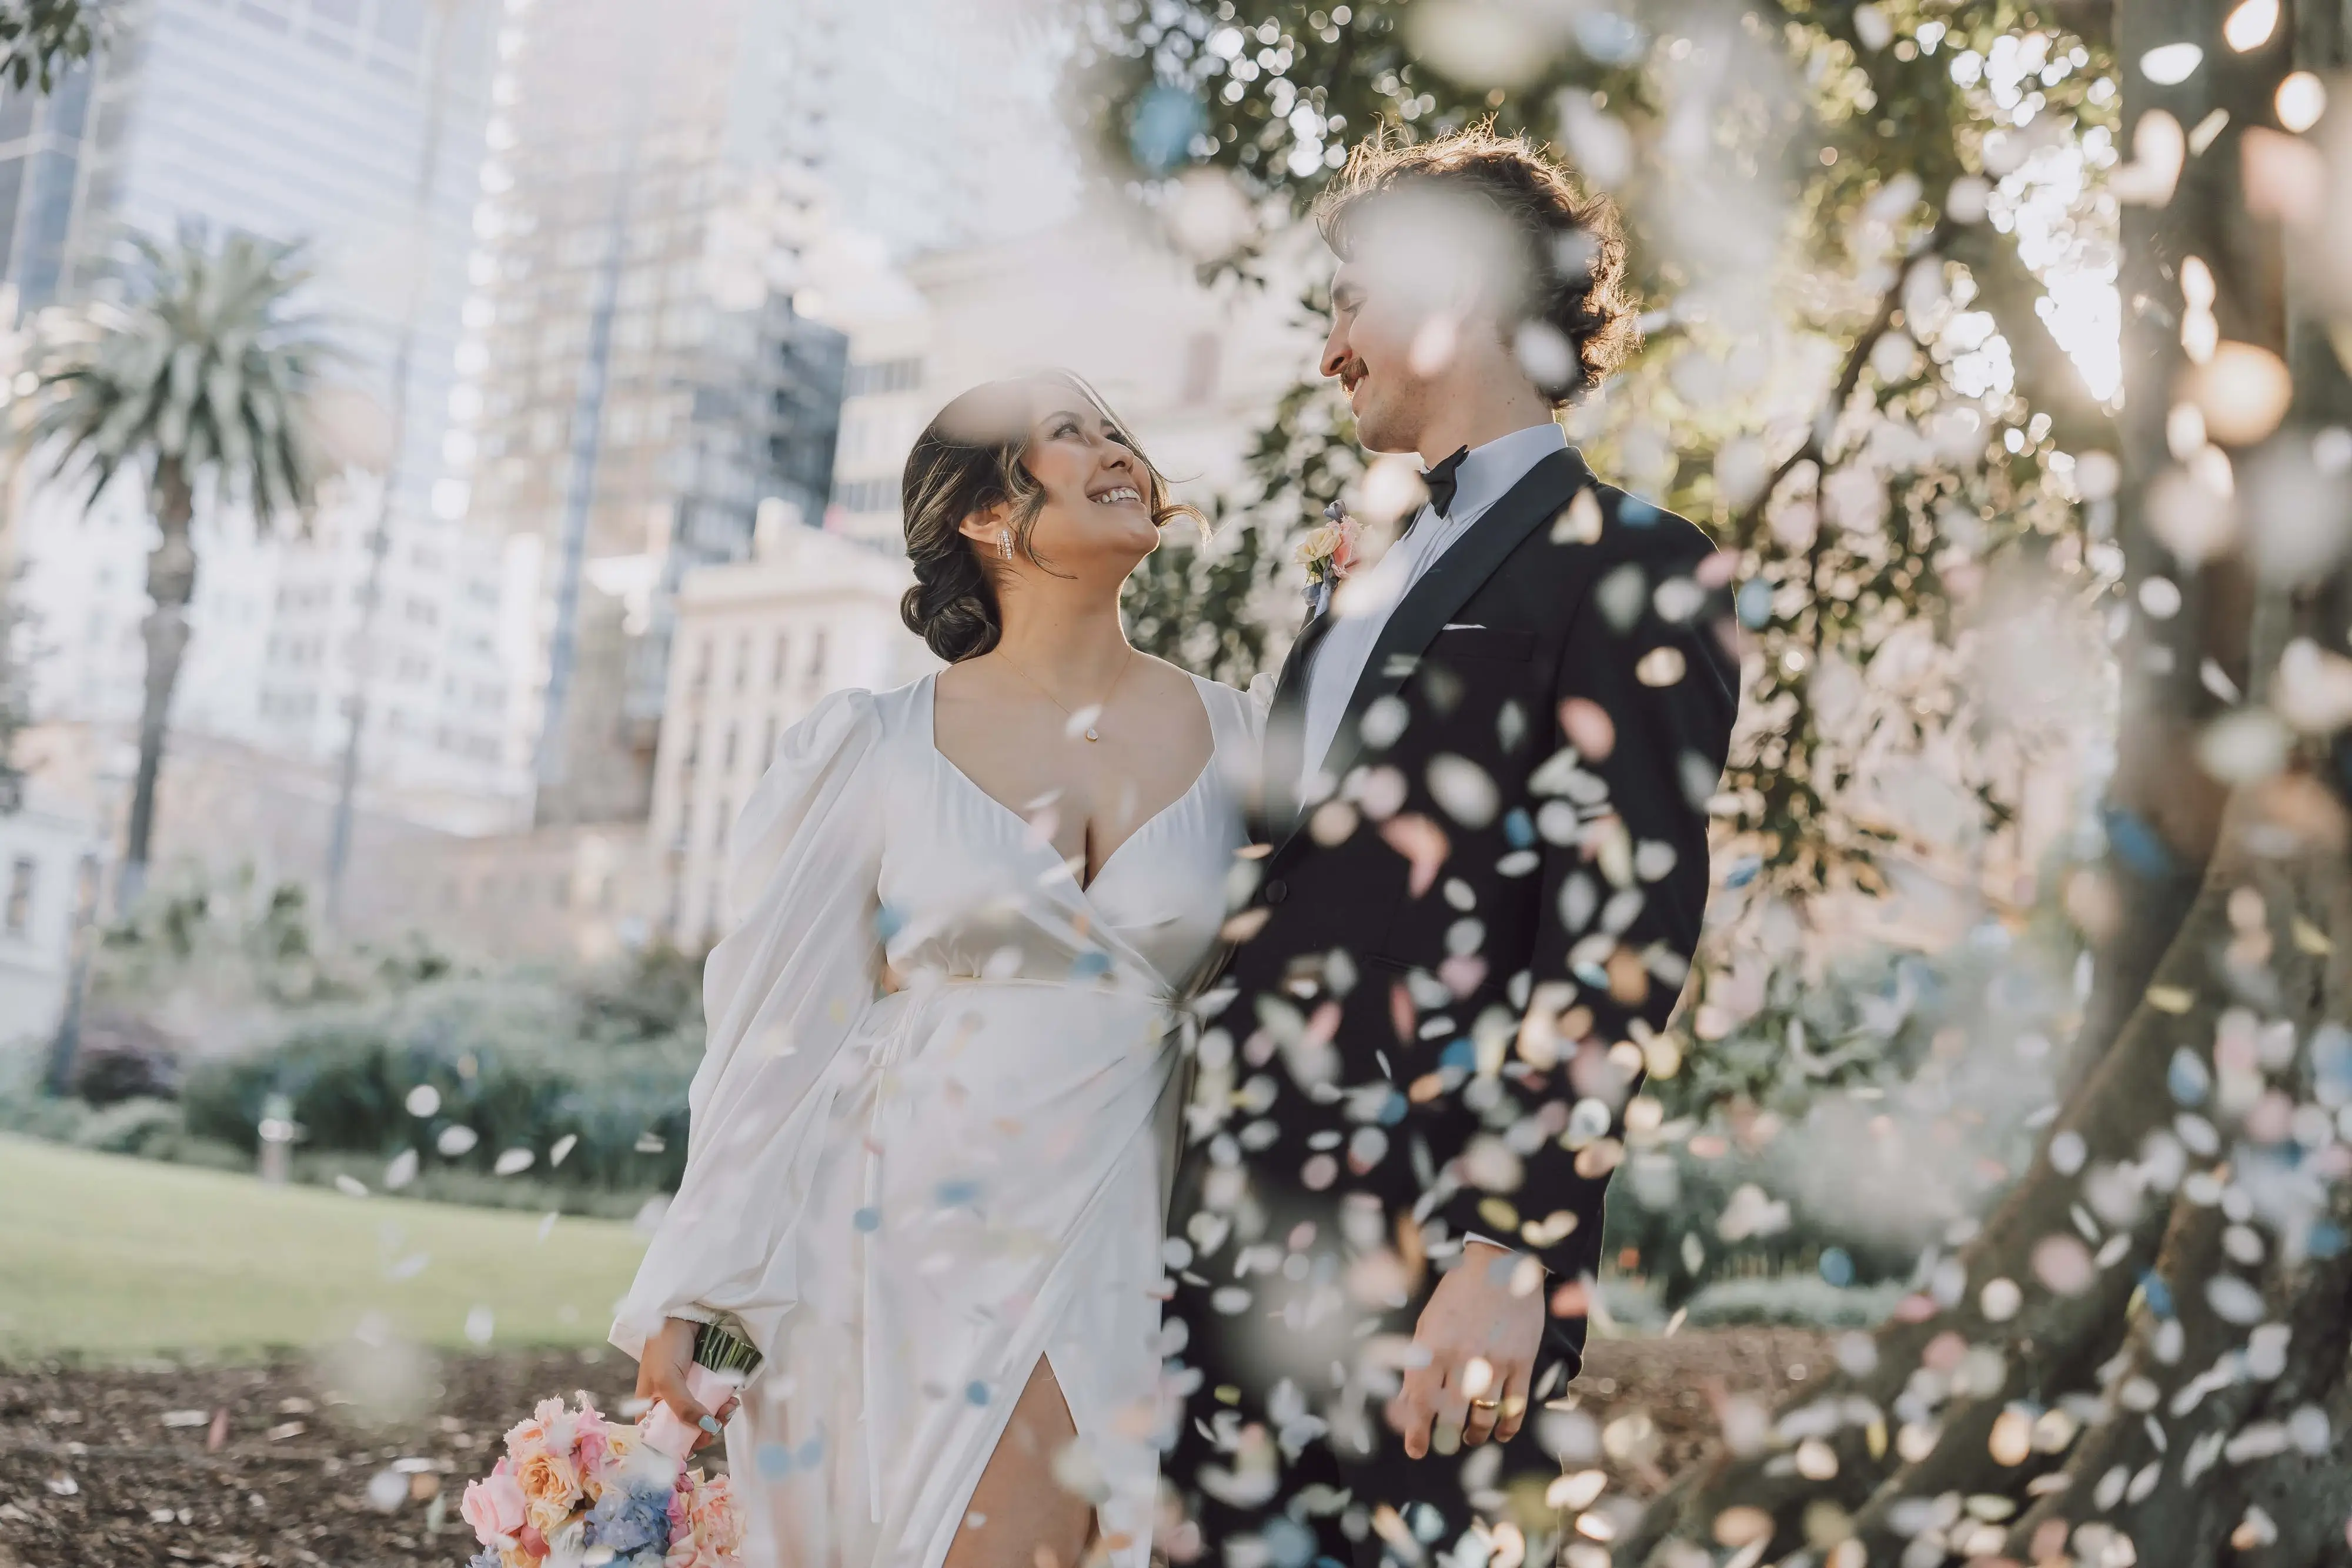 Bride and groom sharing a tender moment surrounded by falling petals in a Melbourne park, epitomizing the art of wedding photography Melbourne.